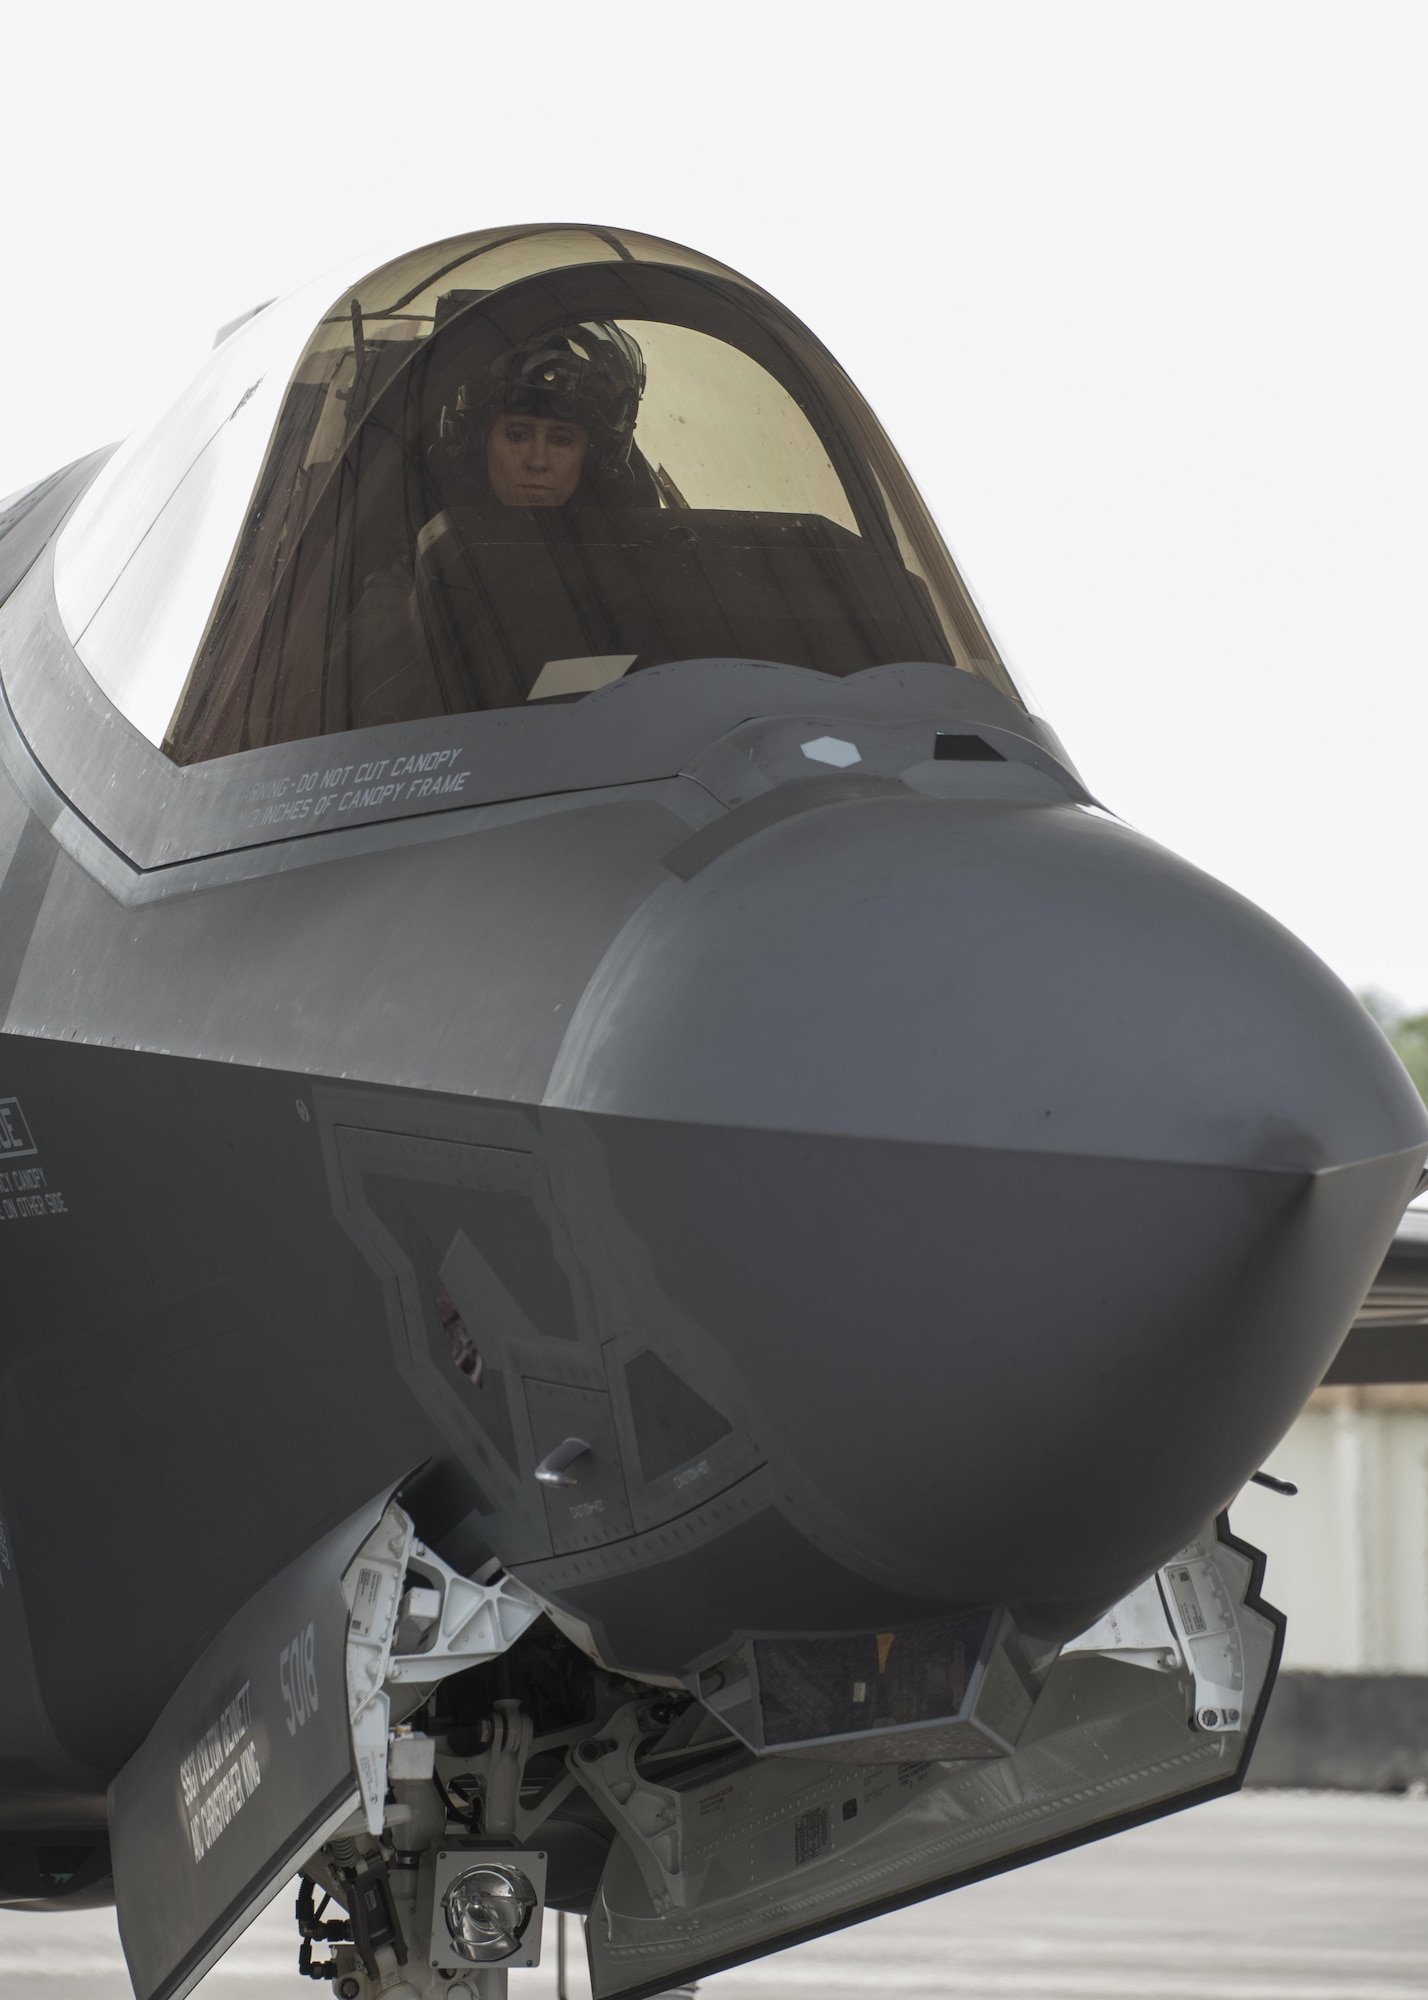 U.S. Air Force Lt. Col. Christine Mau, 33rd Operations Group deputy commander, prepares to taxi an F-35A Lightning II Feb. 27, 2017, at Eglin Air Force Base, Florida. In 2013, Mau became the first and only female F-35 pilot in the world after flying the F-15E Strike Eagle for 16 years. She uses her unique position to embolden and motivate young men and women into the field of aviation. (U.S. Air Force photo by Staff Sgt. Peter Thompson)